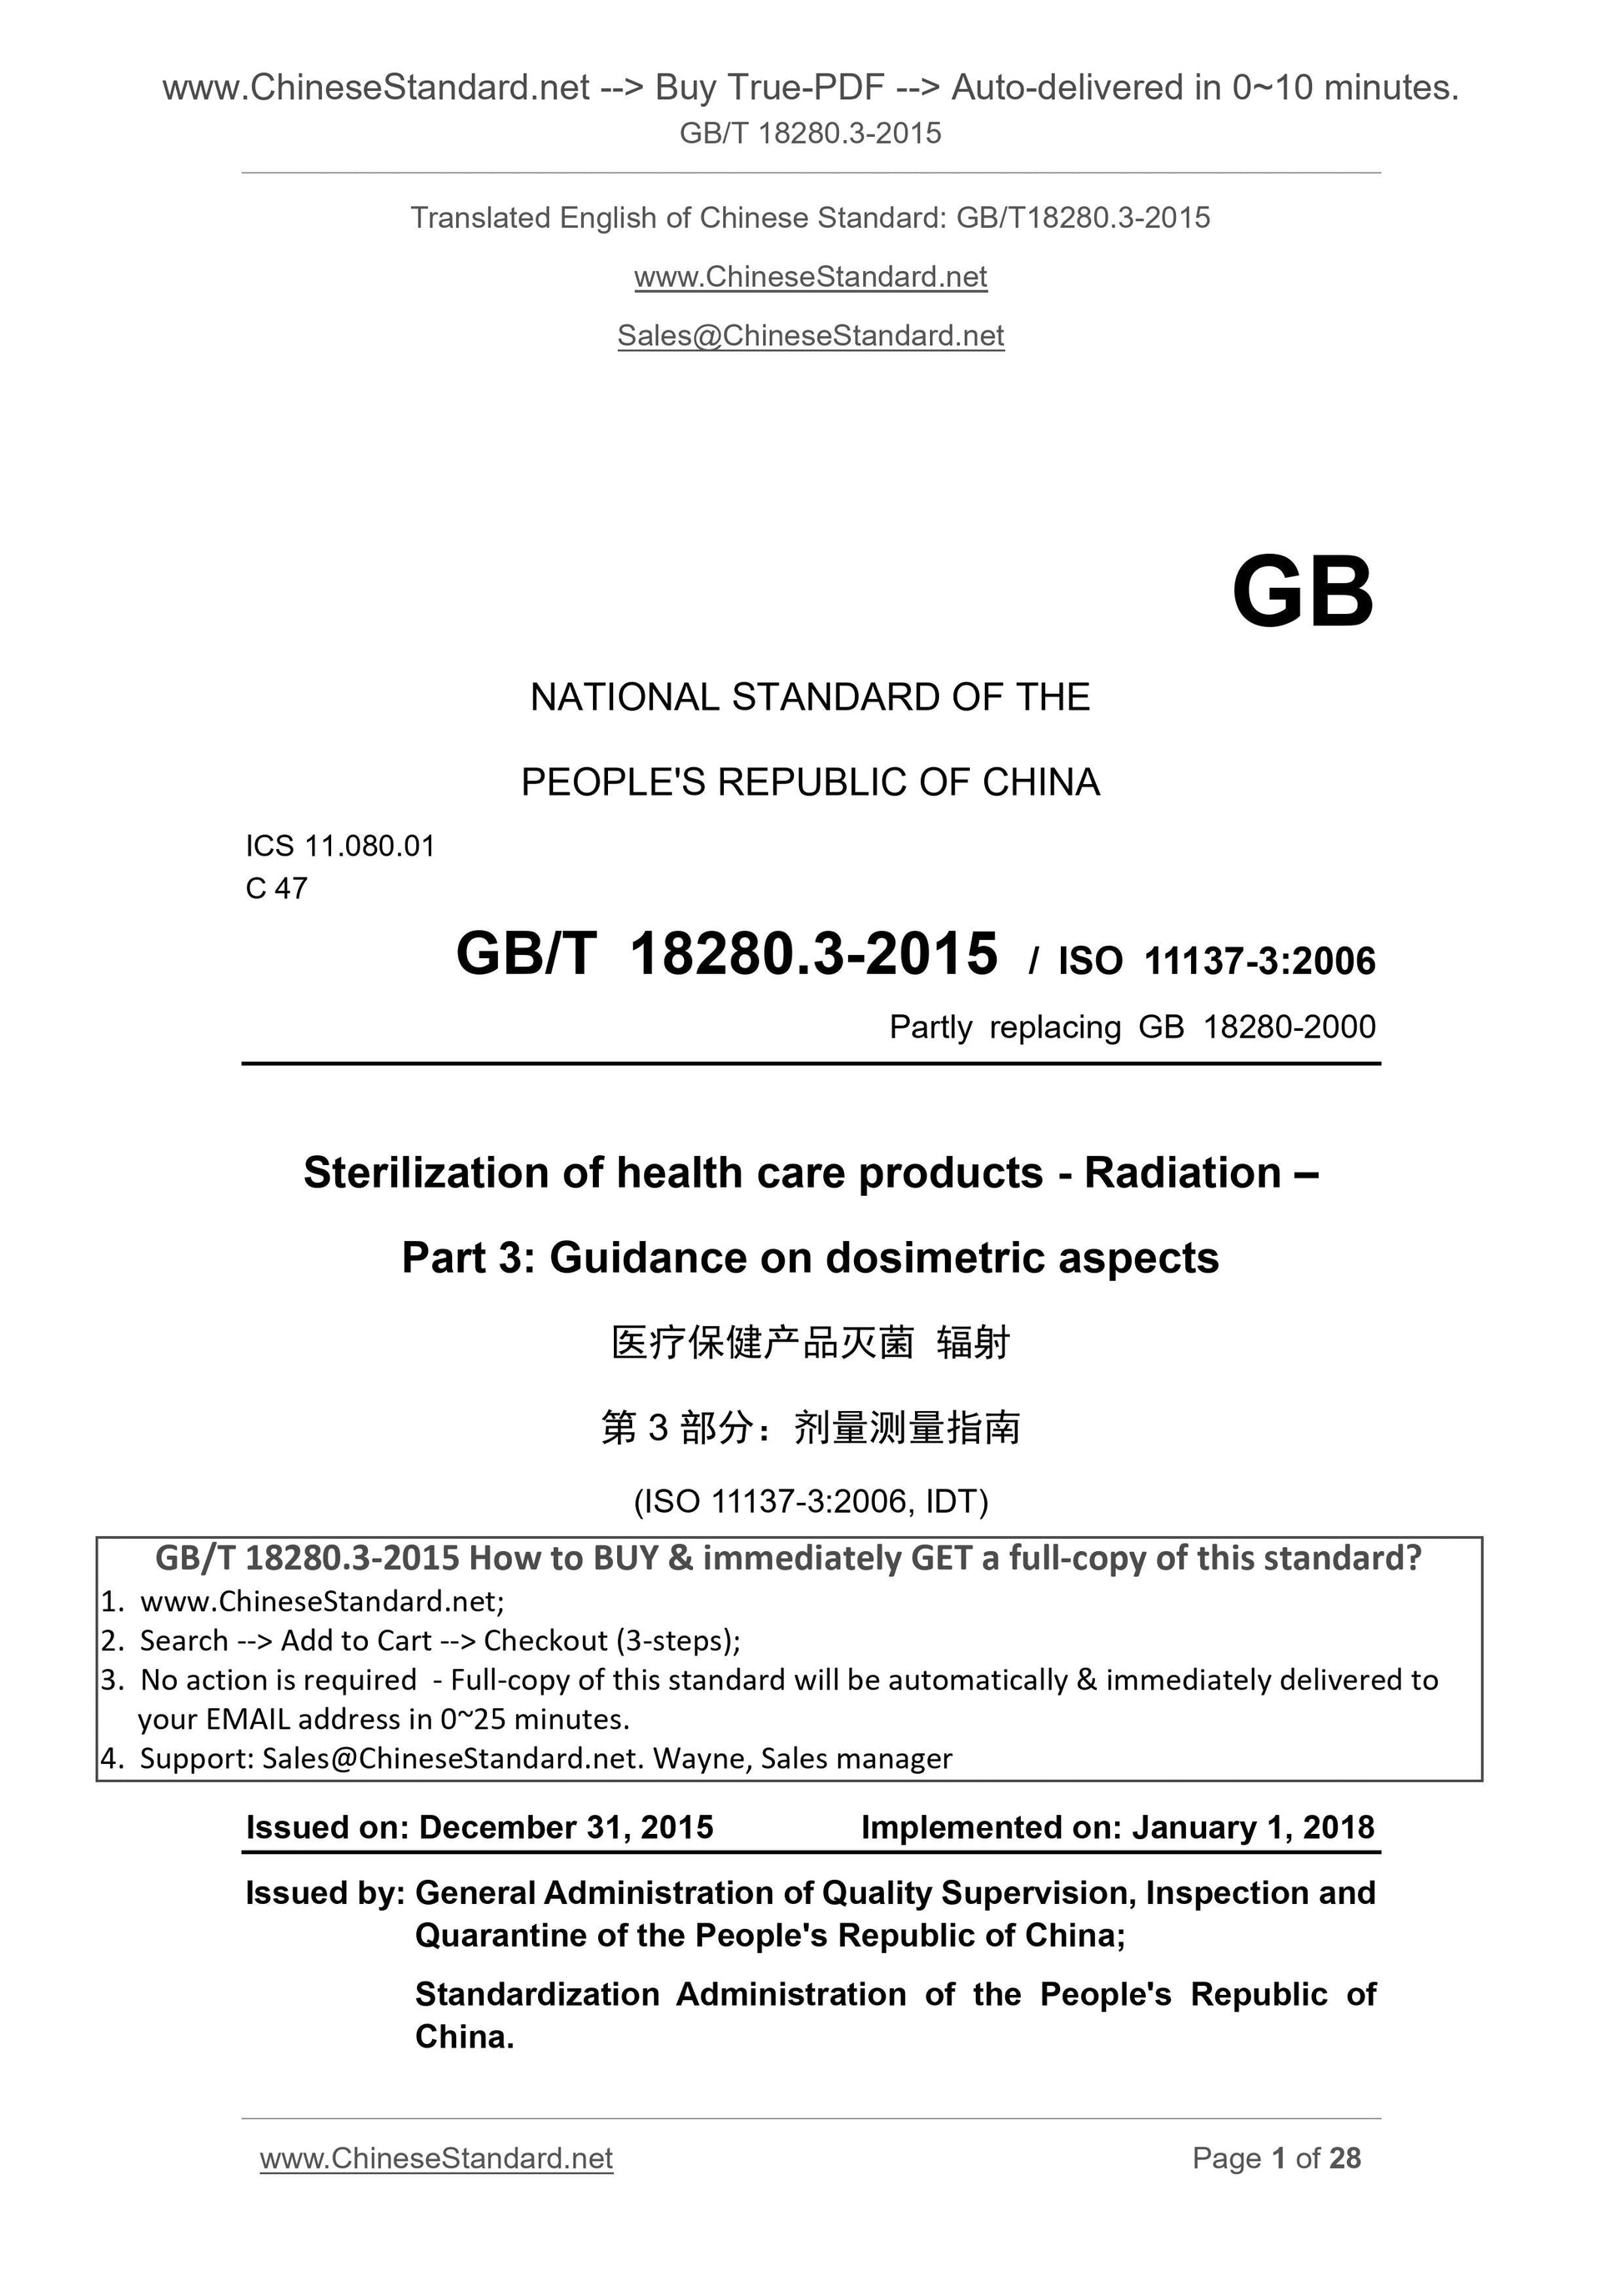 GB/T 18280.3-2015 Page 1